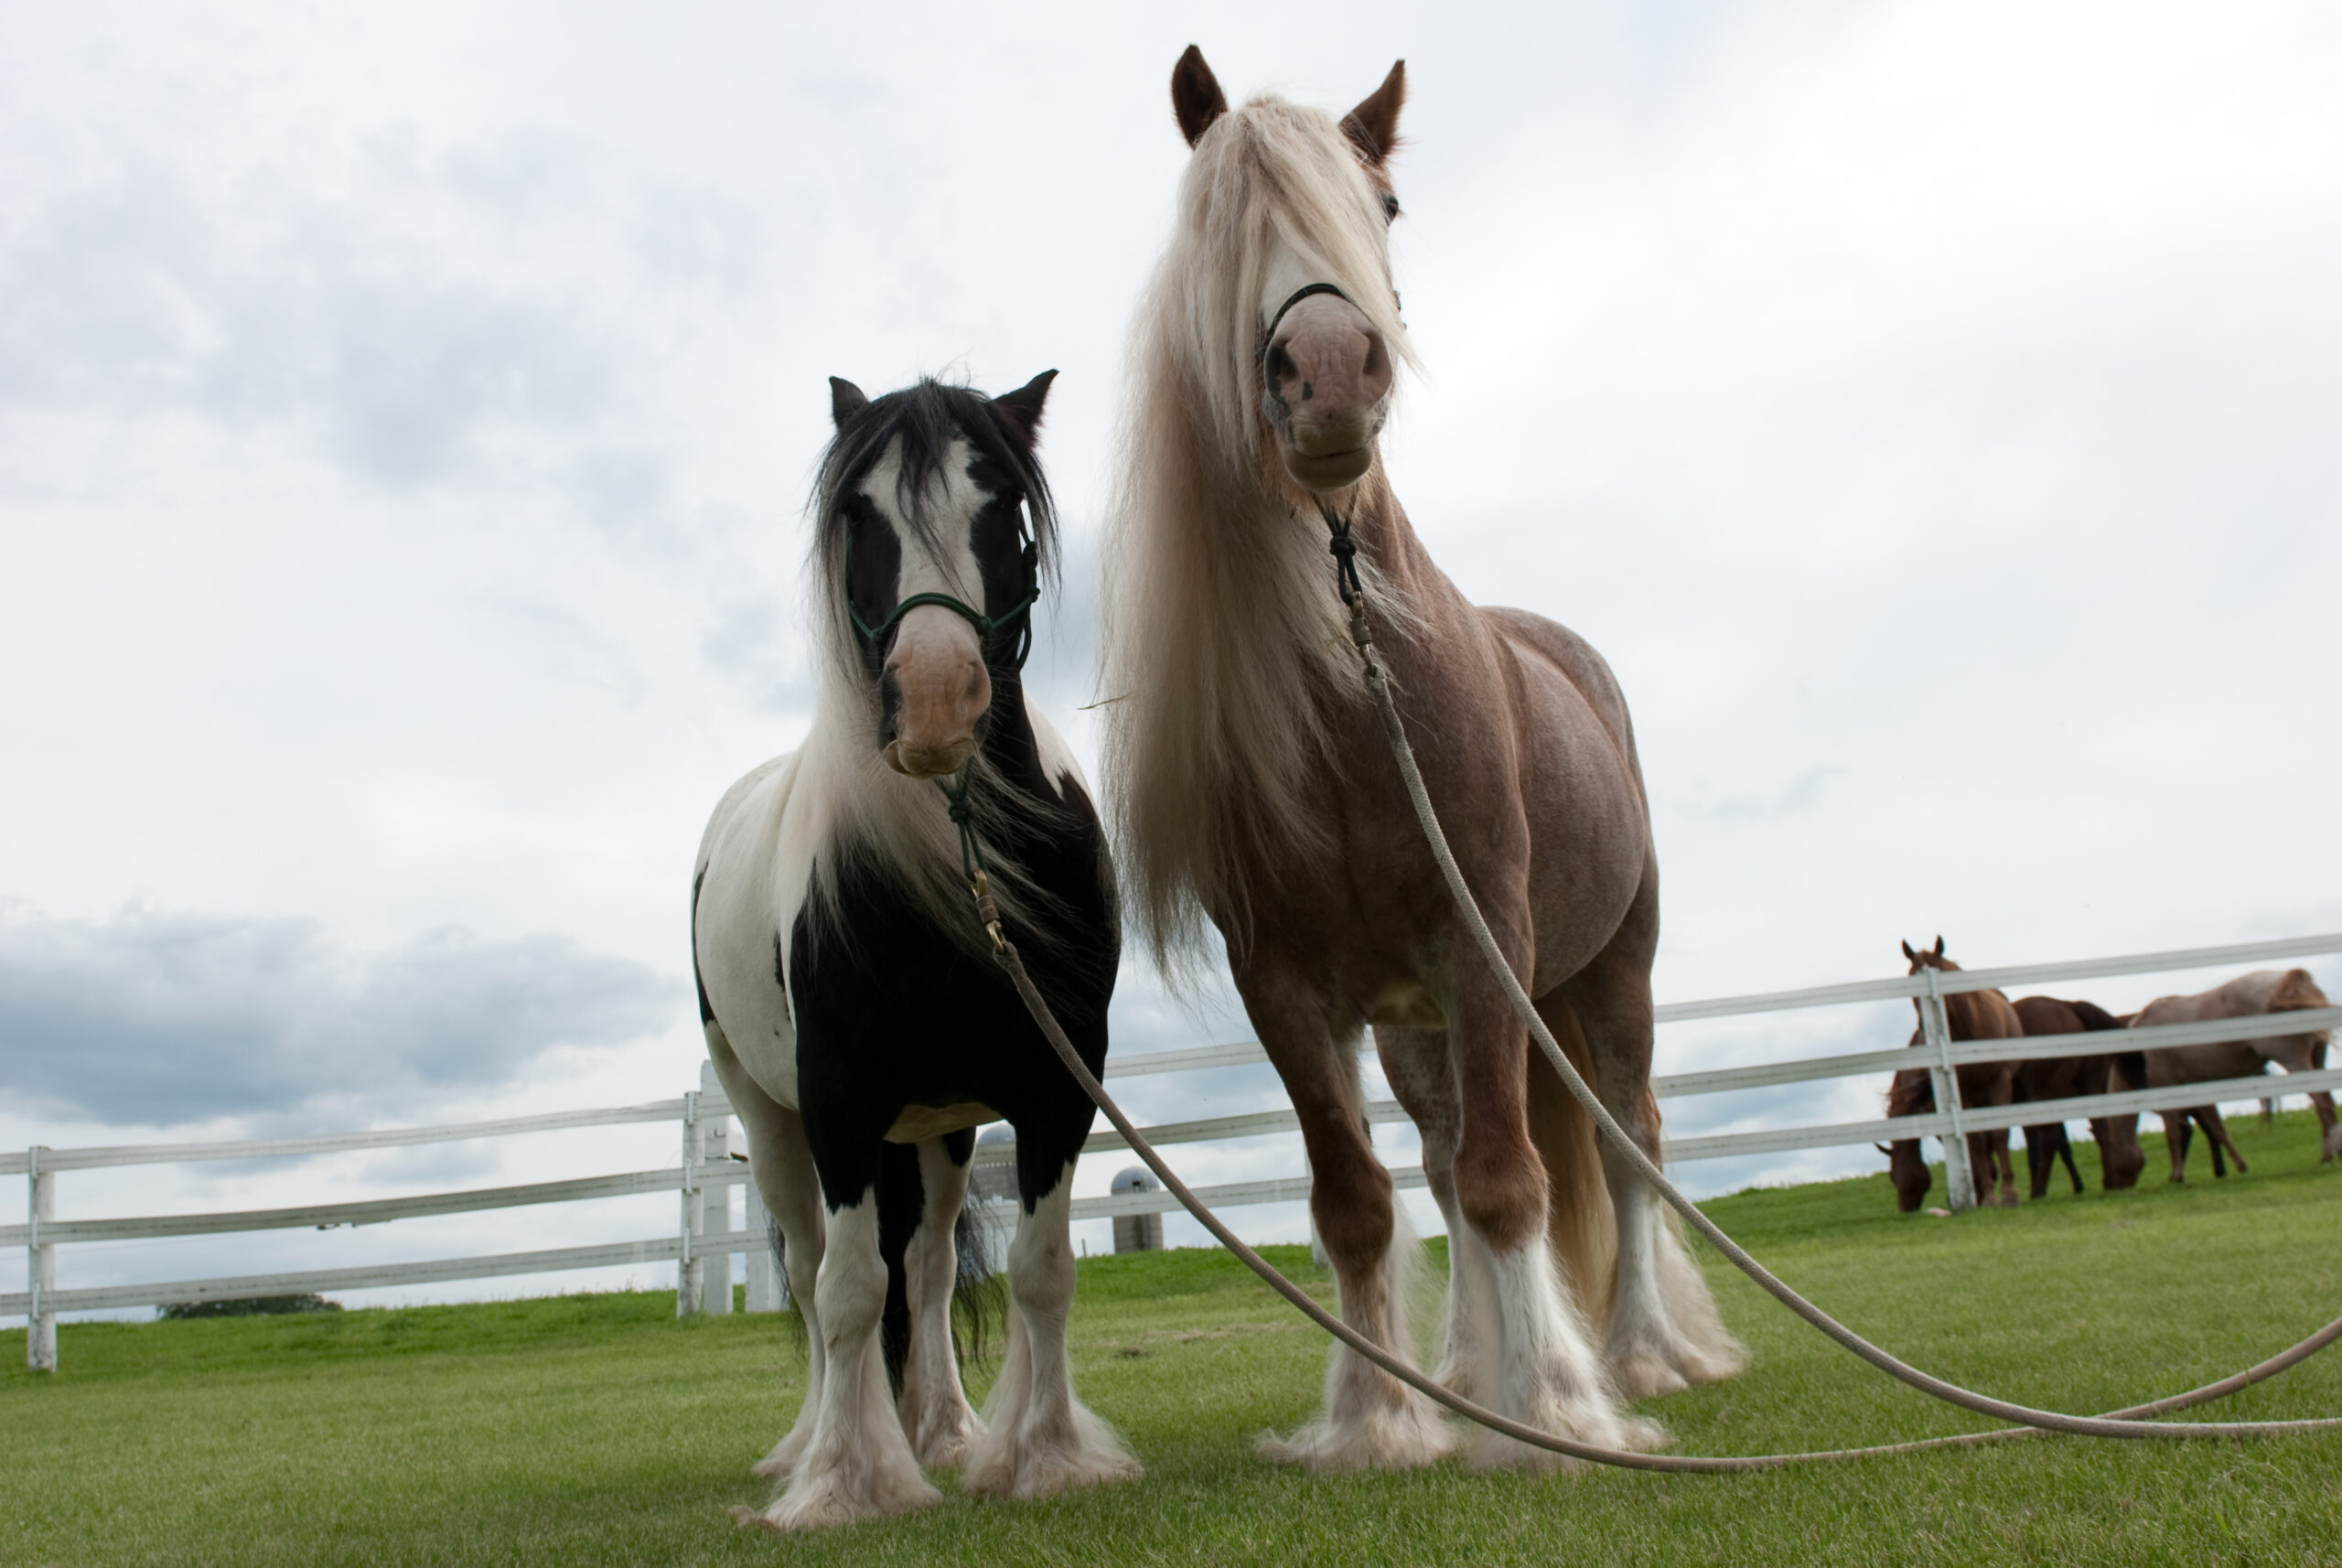 Are Gypsy horses gentle?